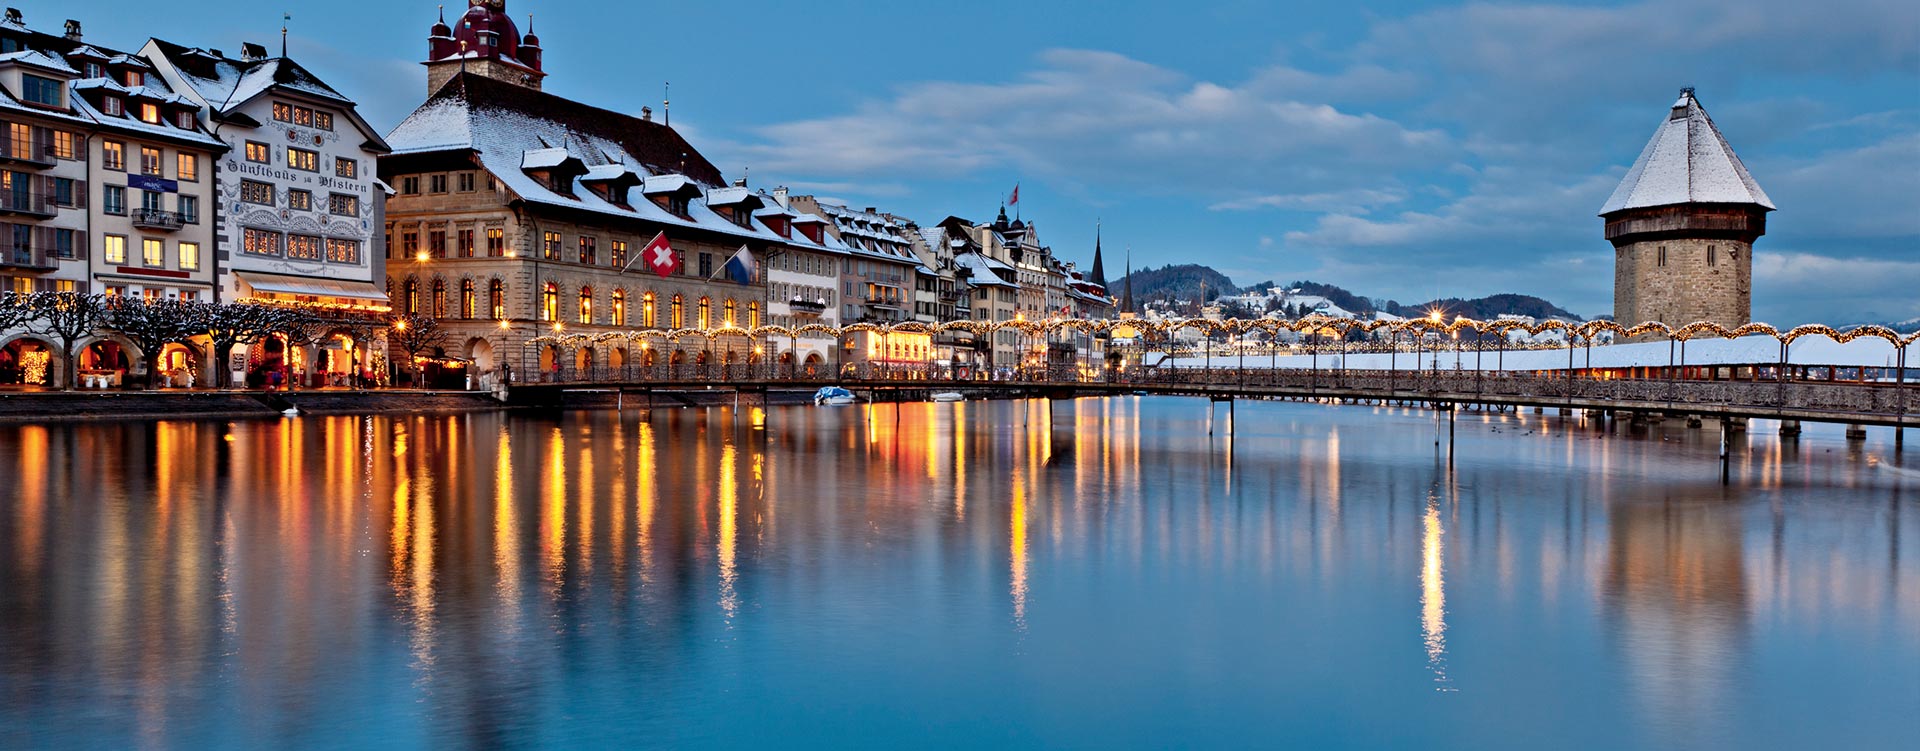 Deals on first class tickets to Lucerne lead to expansive rail passes and fun day trips. - IFlyFirstClass